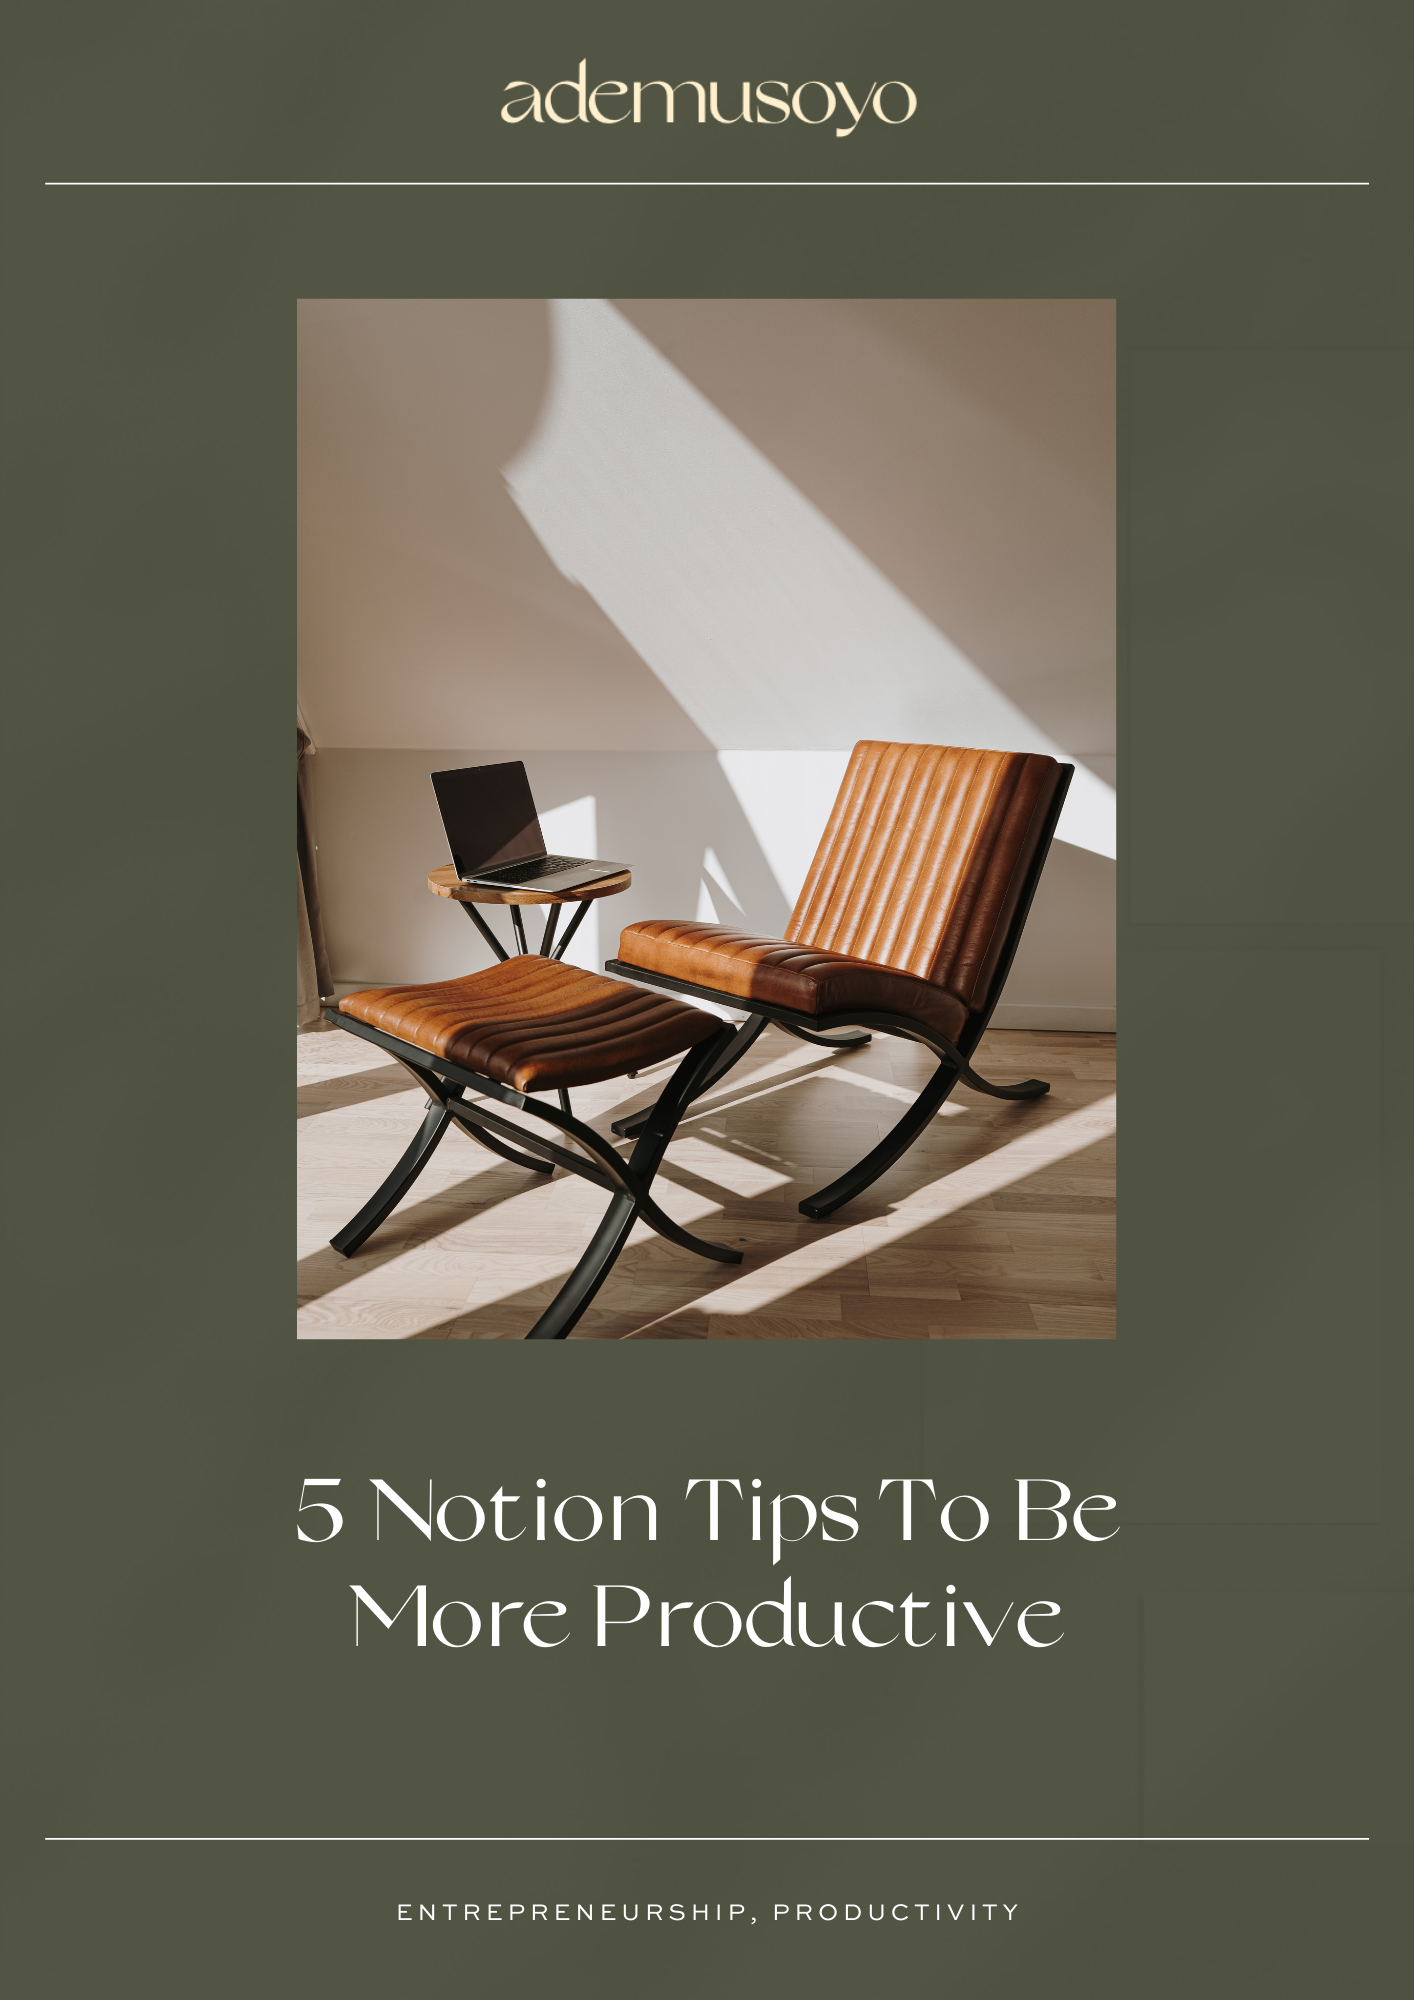 5 Notion Tips to Be More Productive